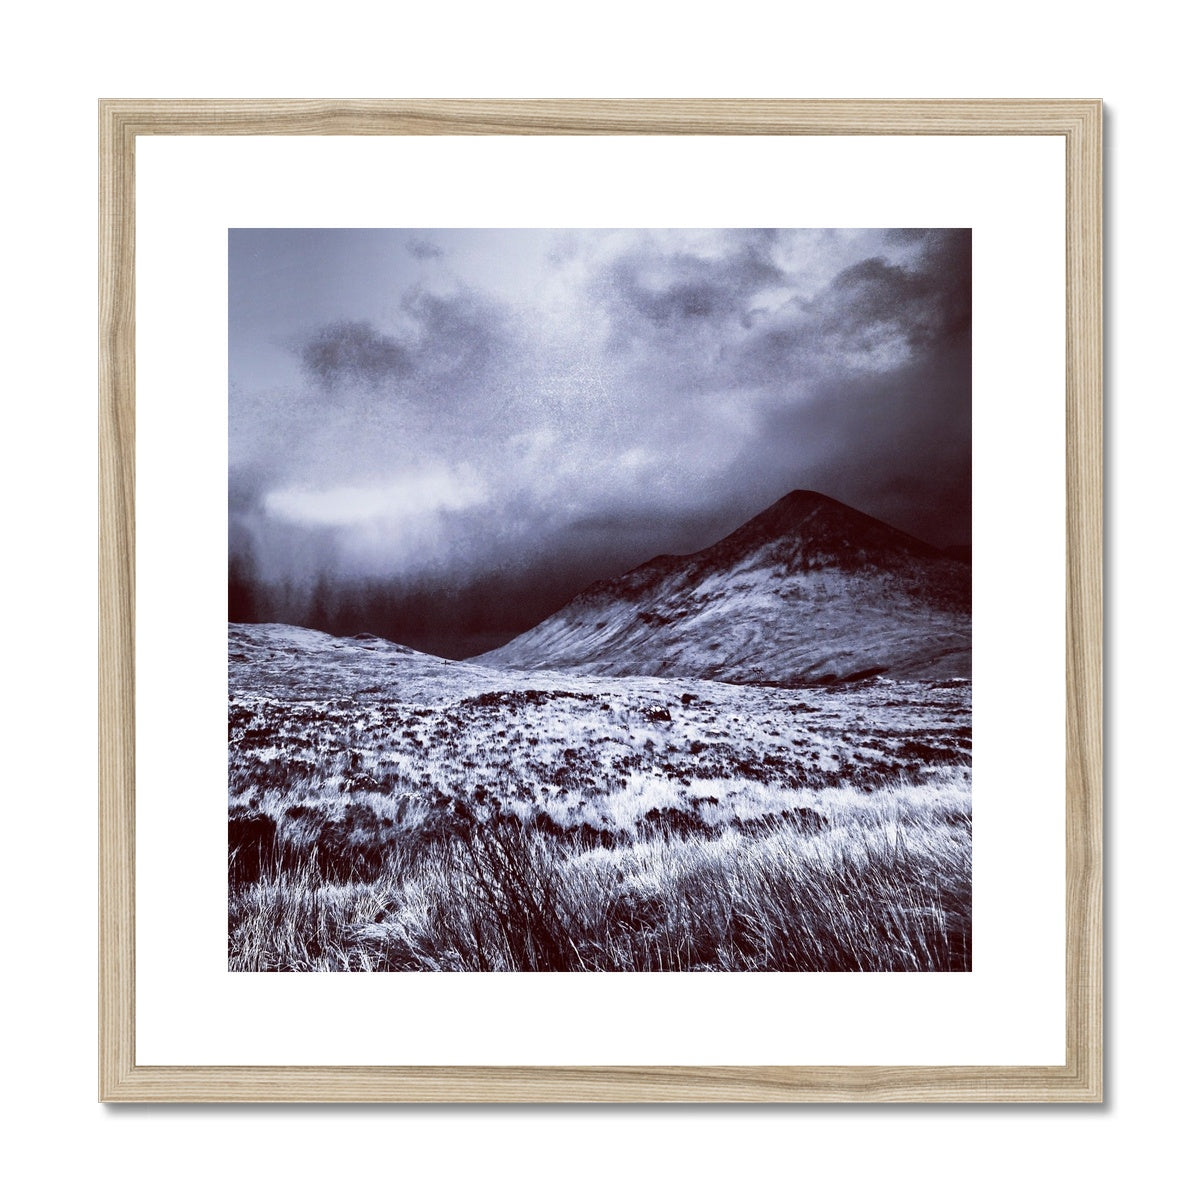 A Brooding Glen Varagil Skye Painting | Framed & Mounted Prints From Scotland-Framed & Mounted Prints-Skye Art Gallery-20"x20"-Natural Frame-Paintings, Prints, Homeware, Art Gifts From Scotland By Scottish Artist Kevin Hunter